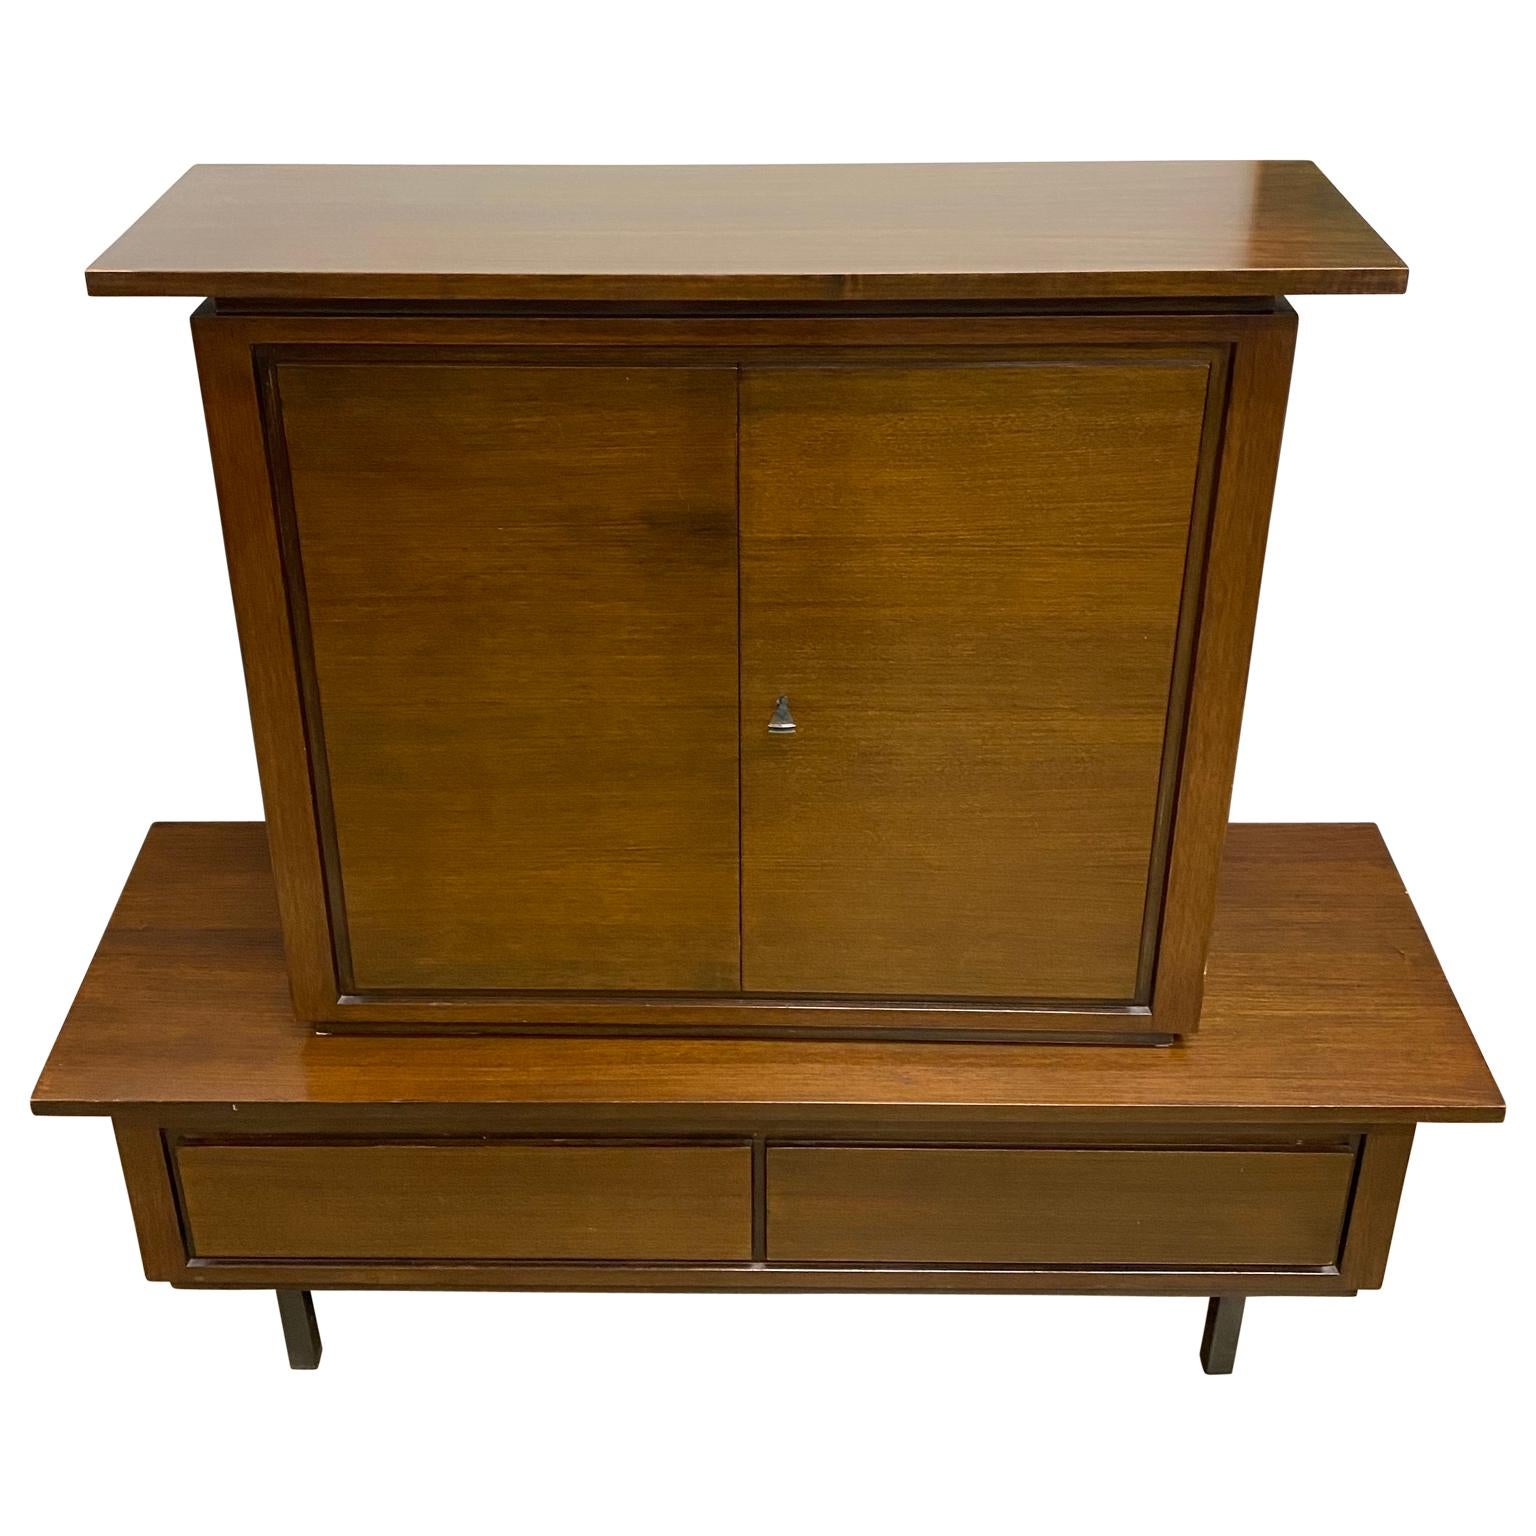 Mid-Century Modern dry bar and credenza set. This unusual, understated piece is in original condition with a glowing walnut finish, having a heavy triangular iron key, Birdseye maple interior, mirrored back and elegant black glass top shelf with